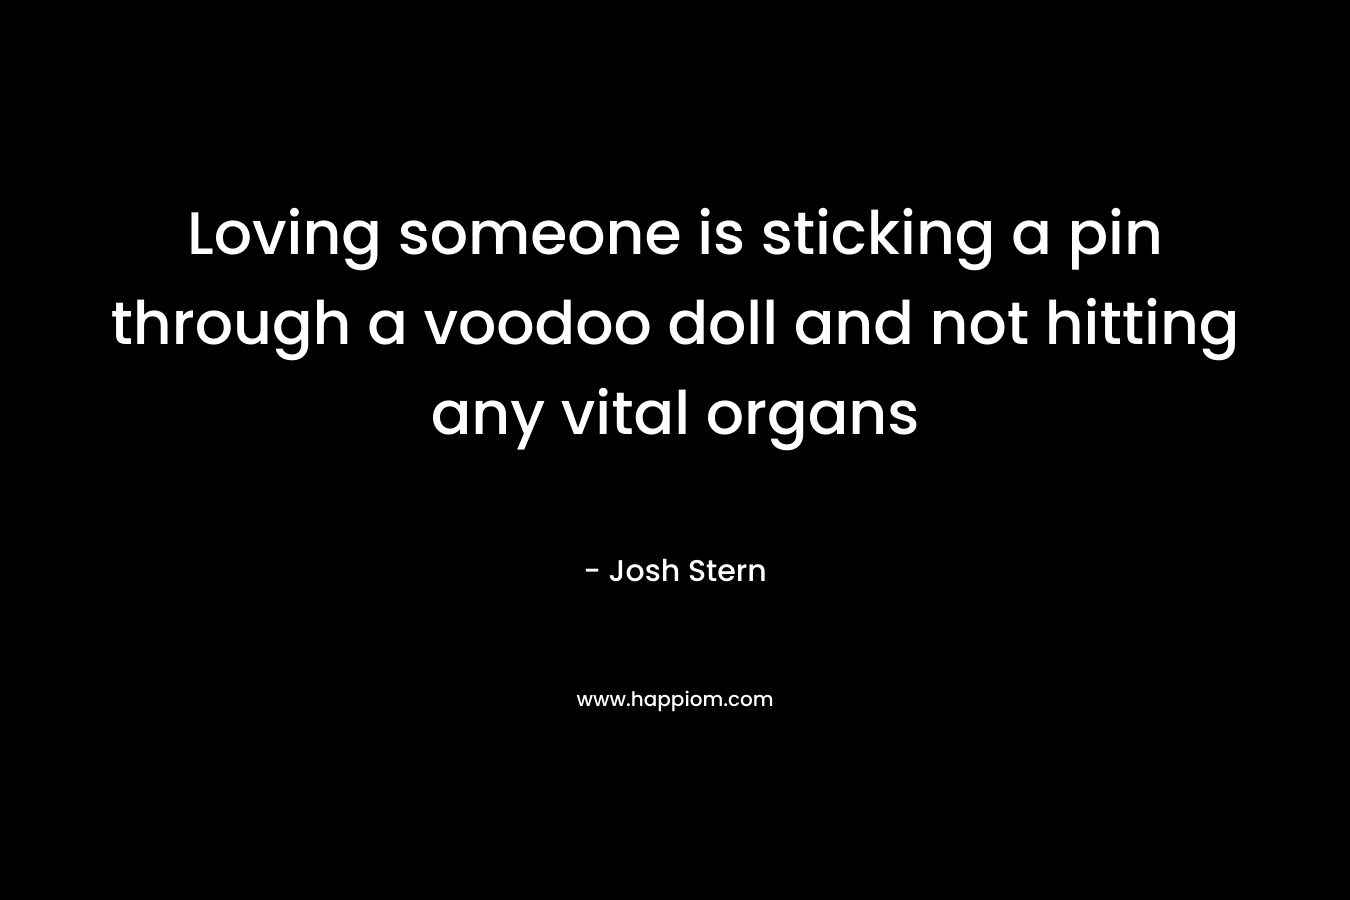 Loving someone is sticking a pin through a voodoo doll and not hitting any vital organs – Josh Stern